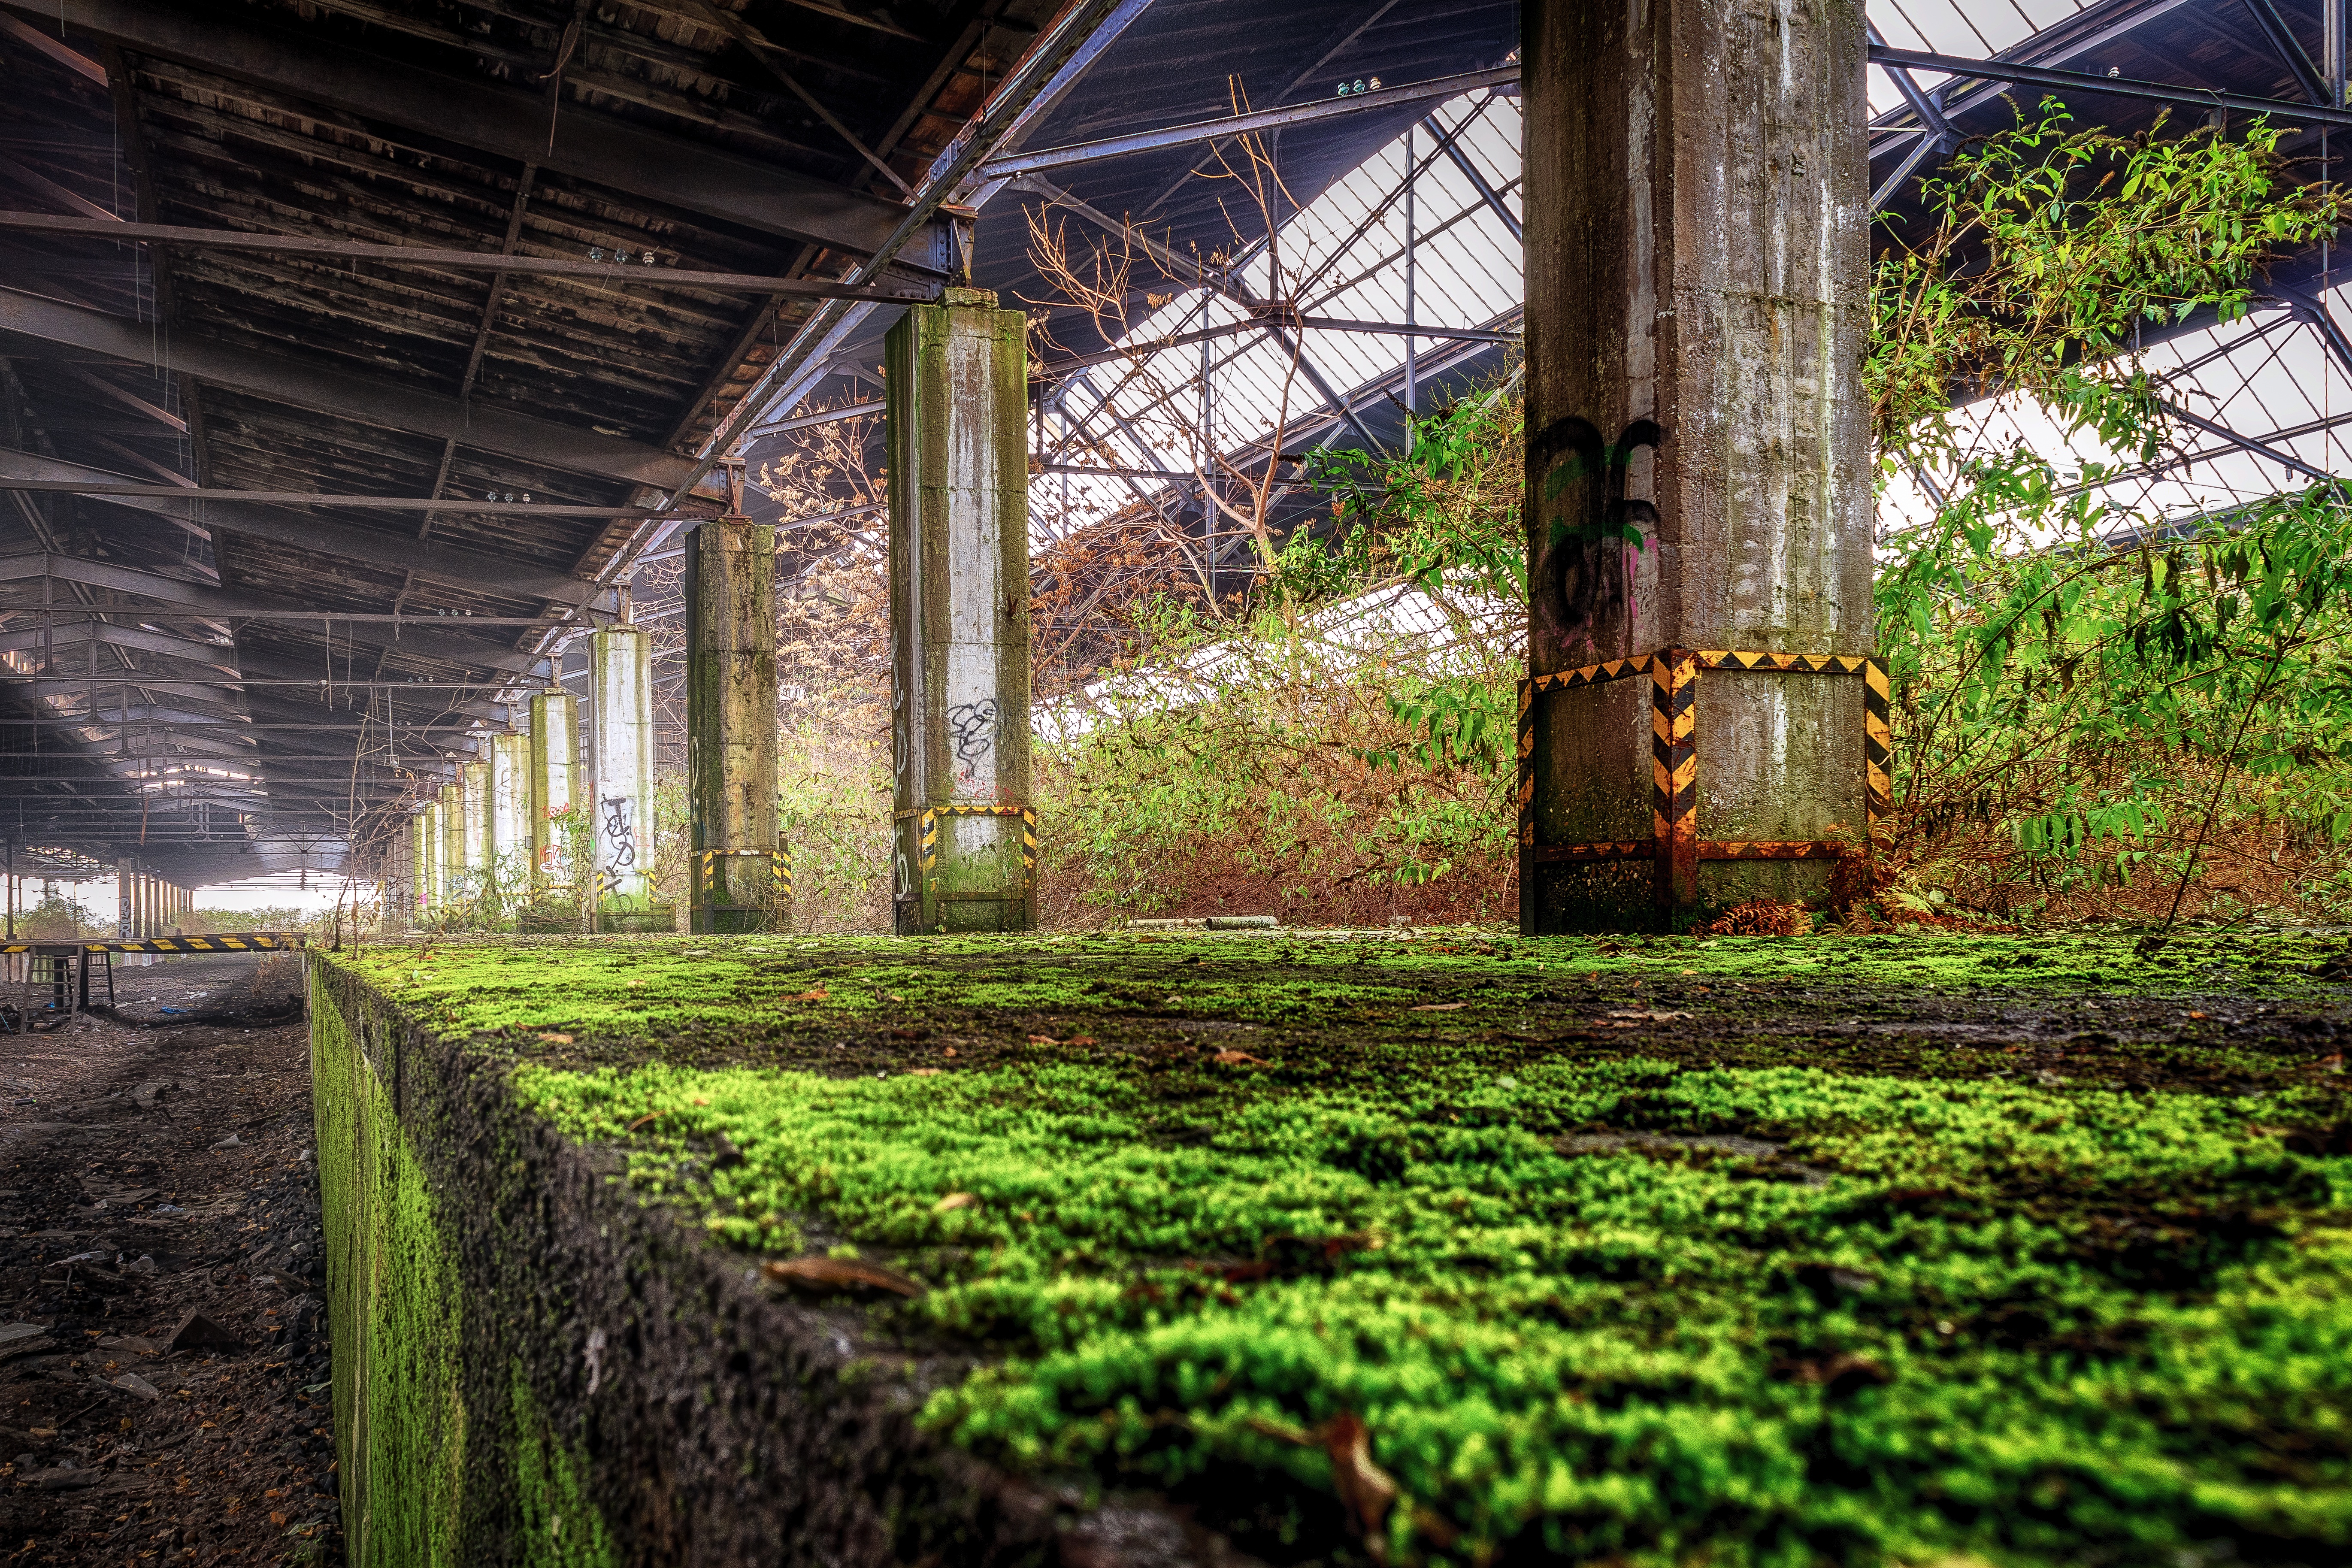 An abandoned large greenhouse